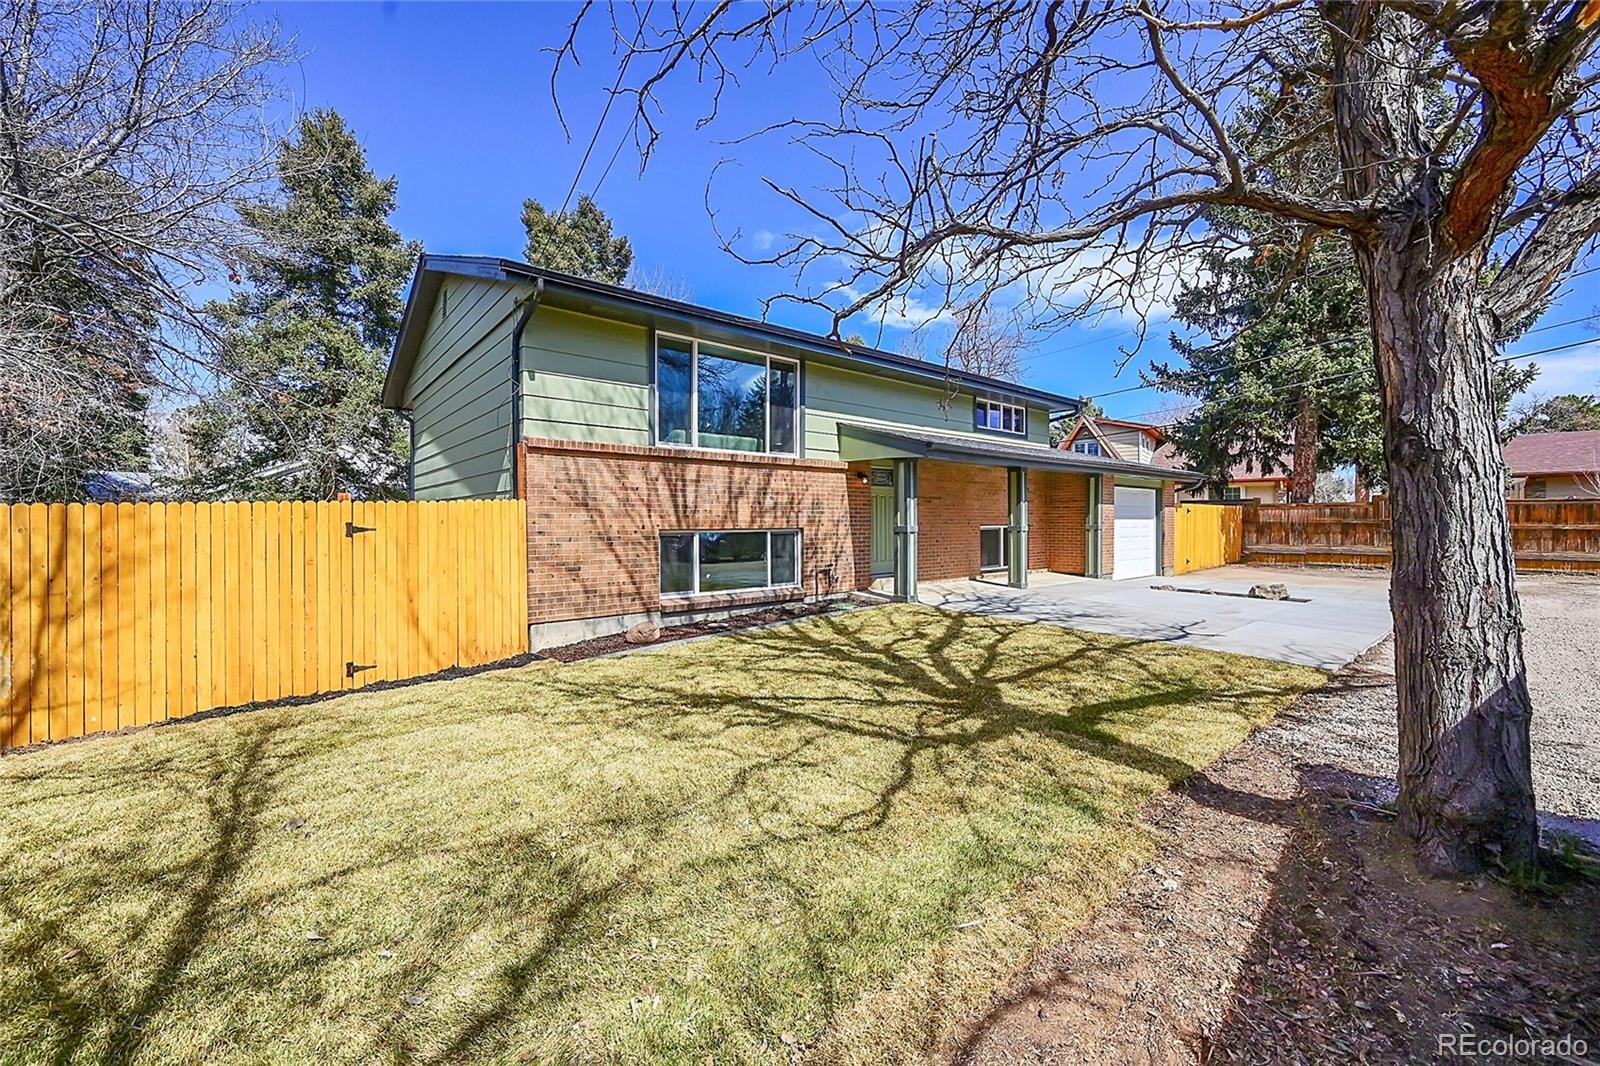 1863 s chester circle, denver sold home. Closed on 2024-05-03 for $544,000.